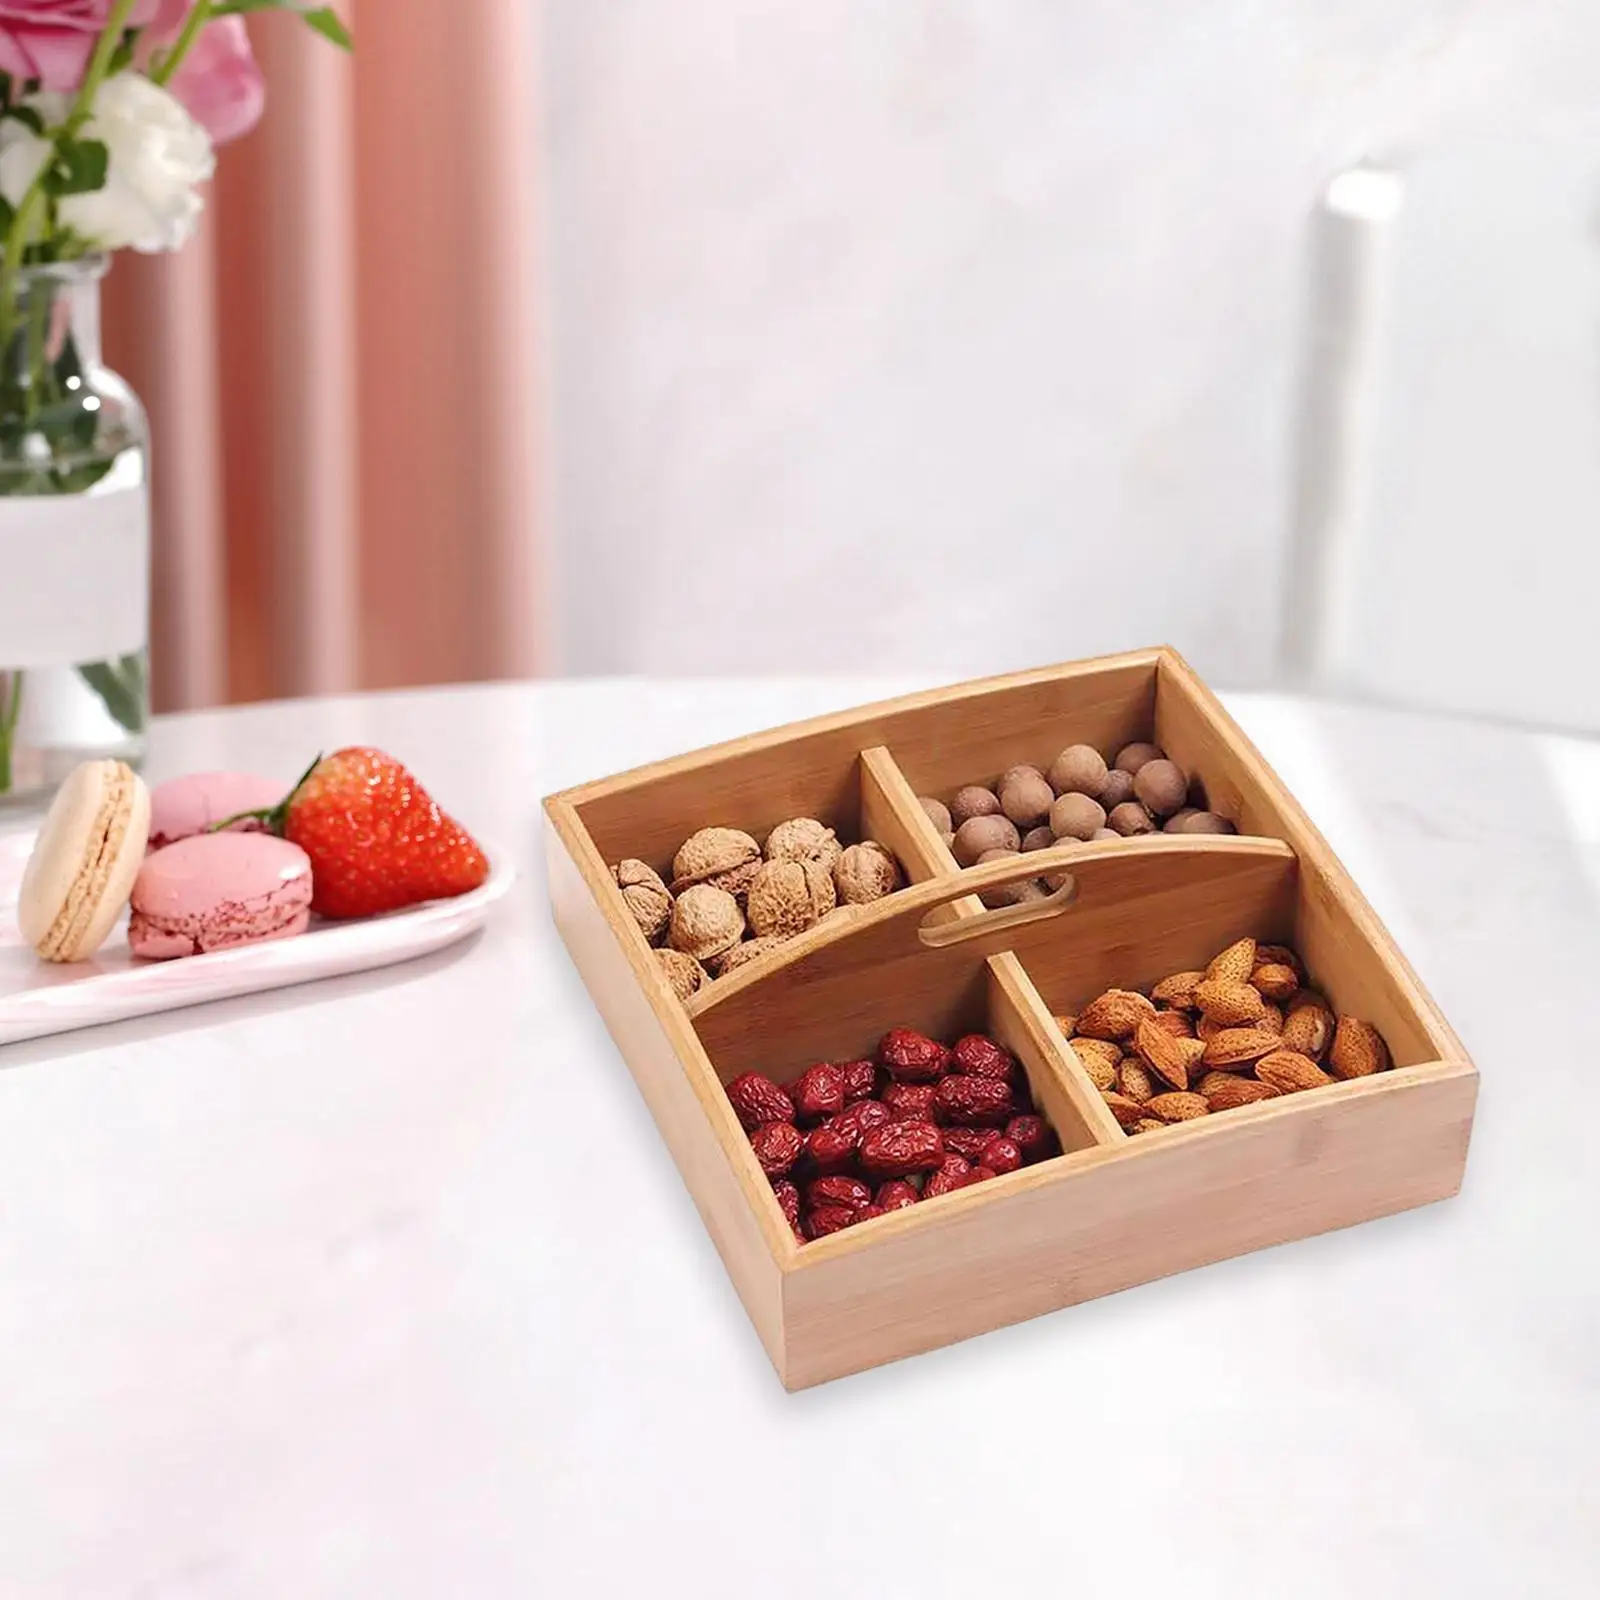 Dried Fruit Box, Serving Platter 4 Compartment Sectional Serving Tray for Dessert